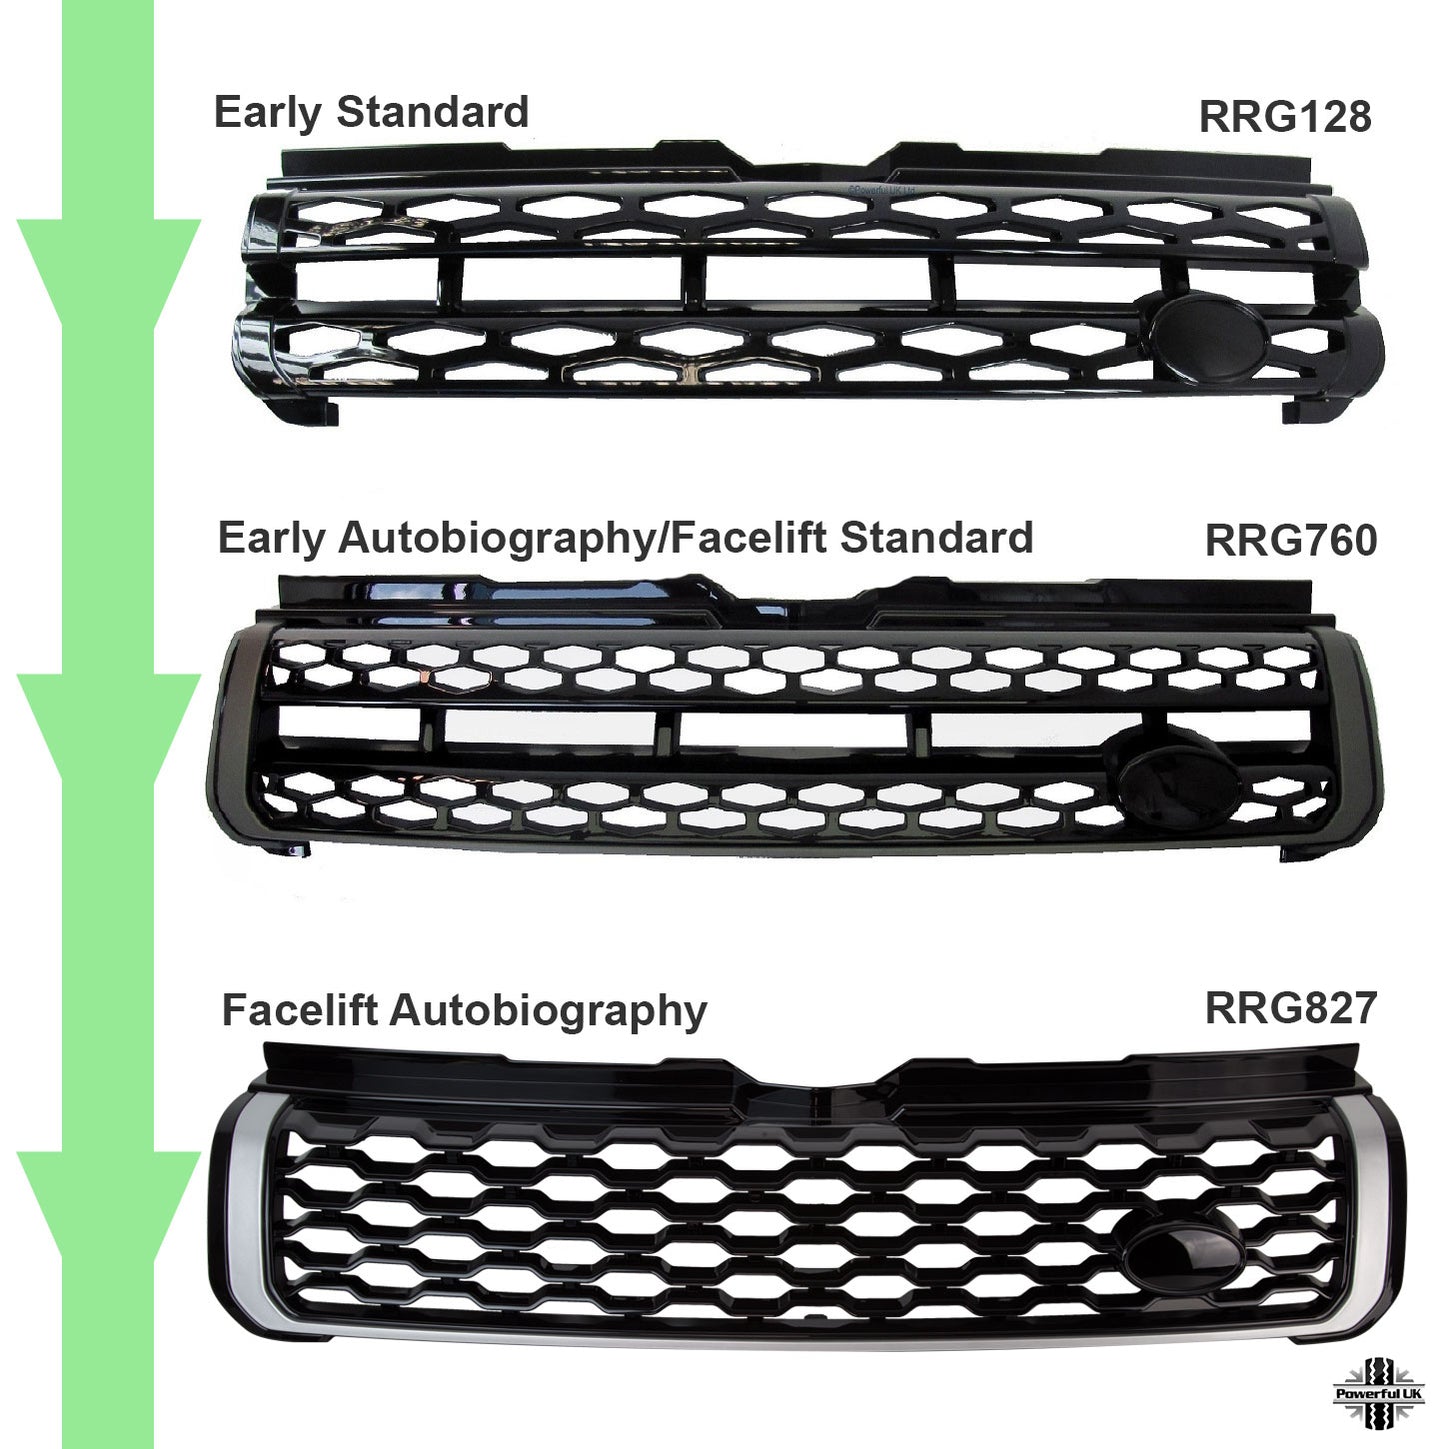 Front Grille - 2016 "Autobiography Style" - Gloss Black for Range Rover Evoque